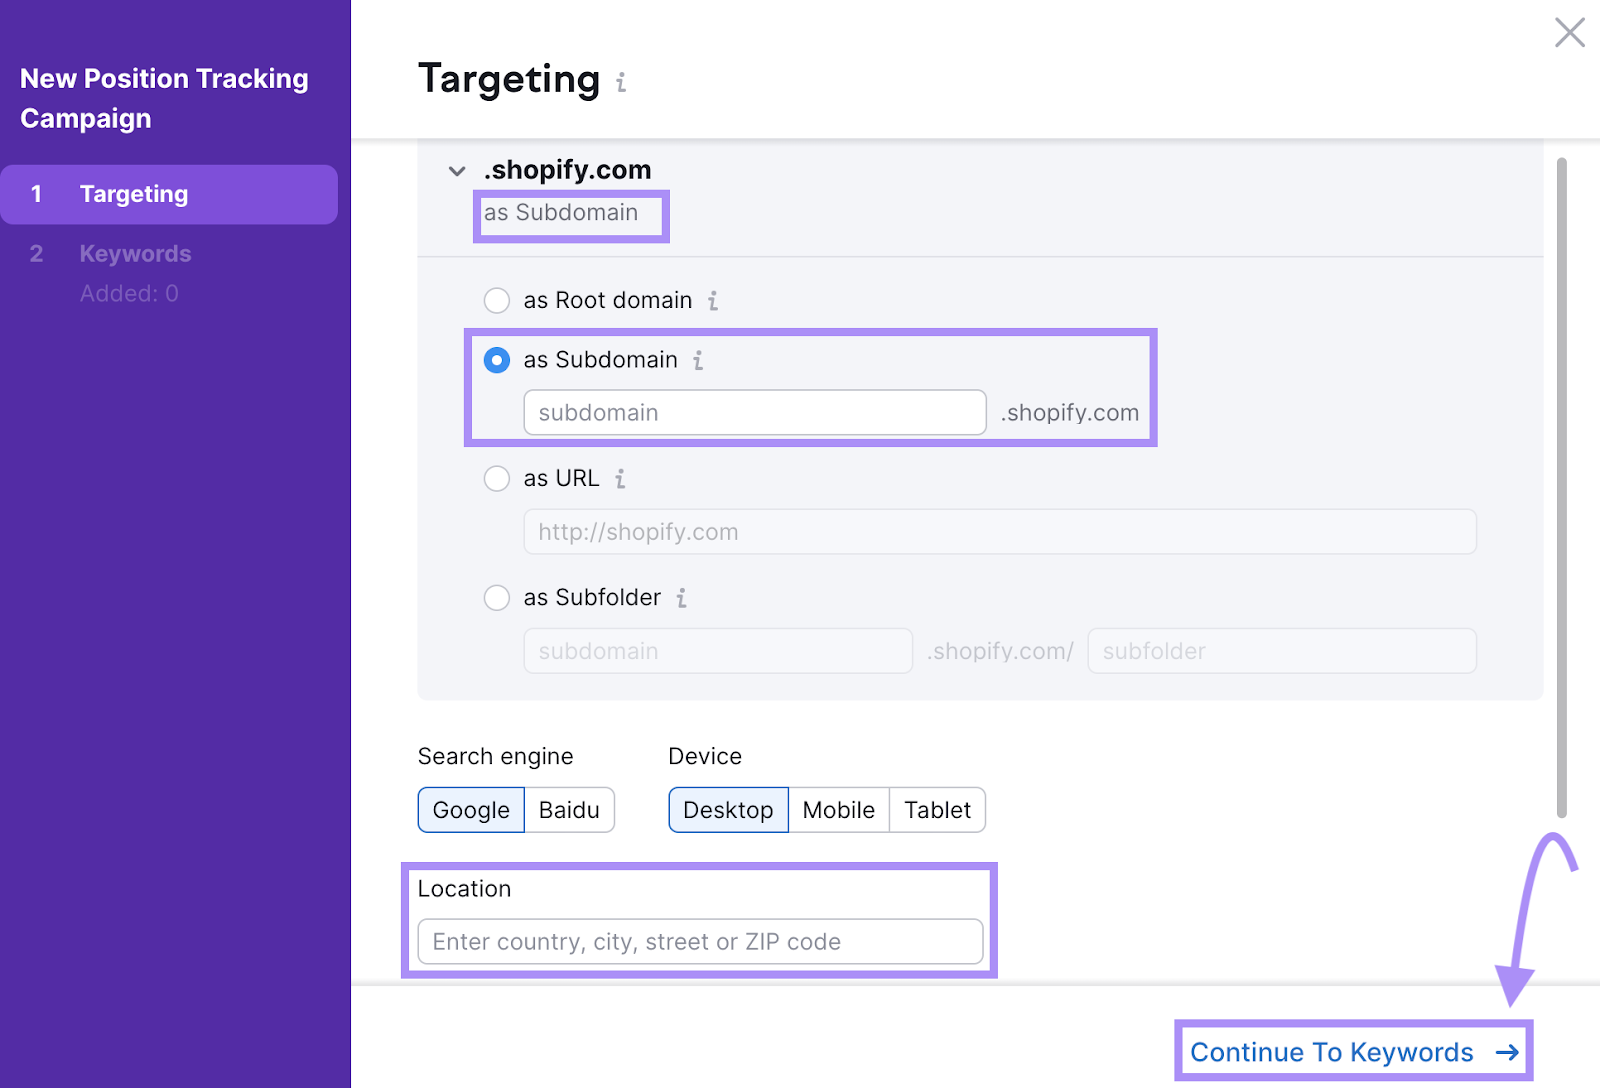 "Targeting" page in Position Tracking settings